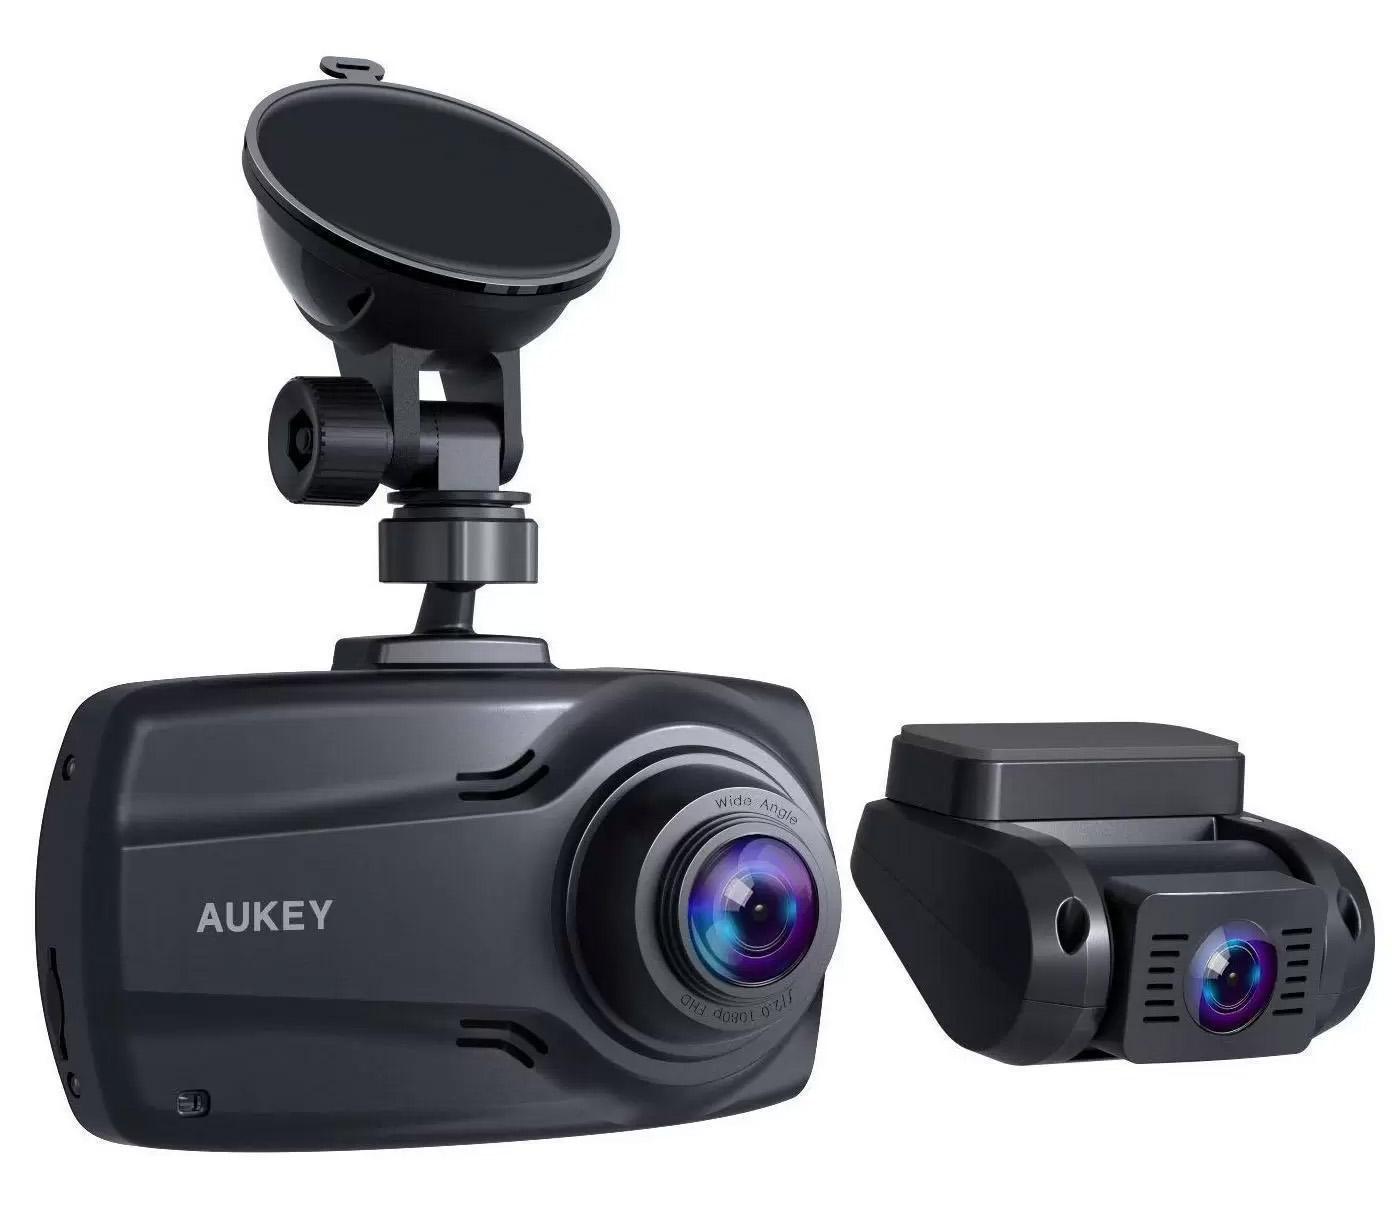 Aukey DR03 Dual Dash Cams with Night Vision for $64.99 Shipped